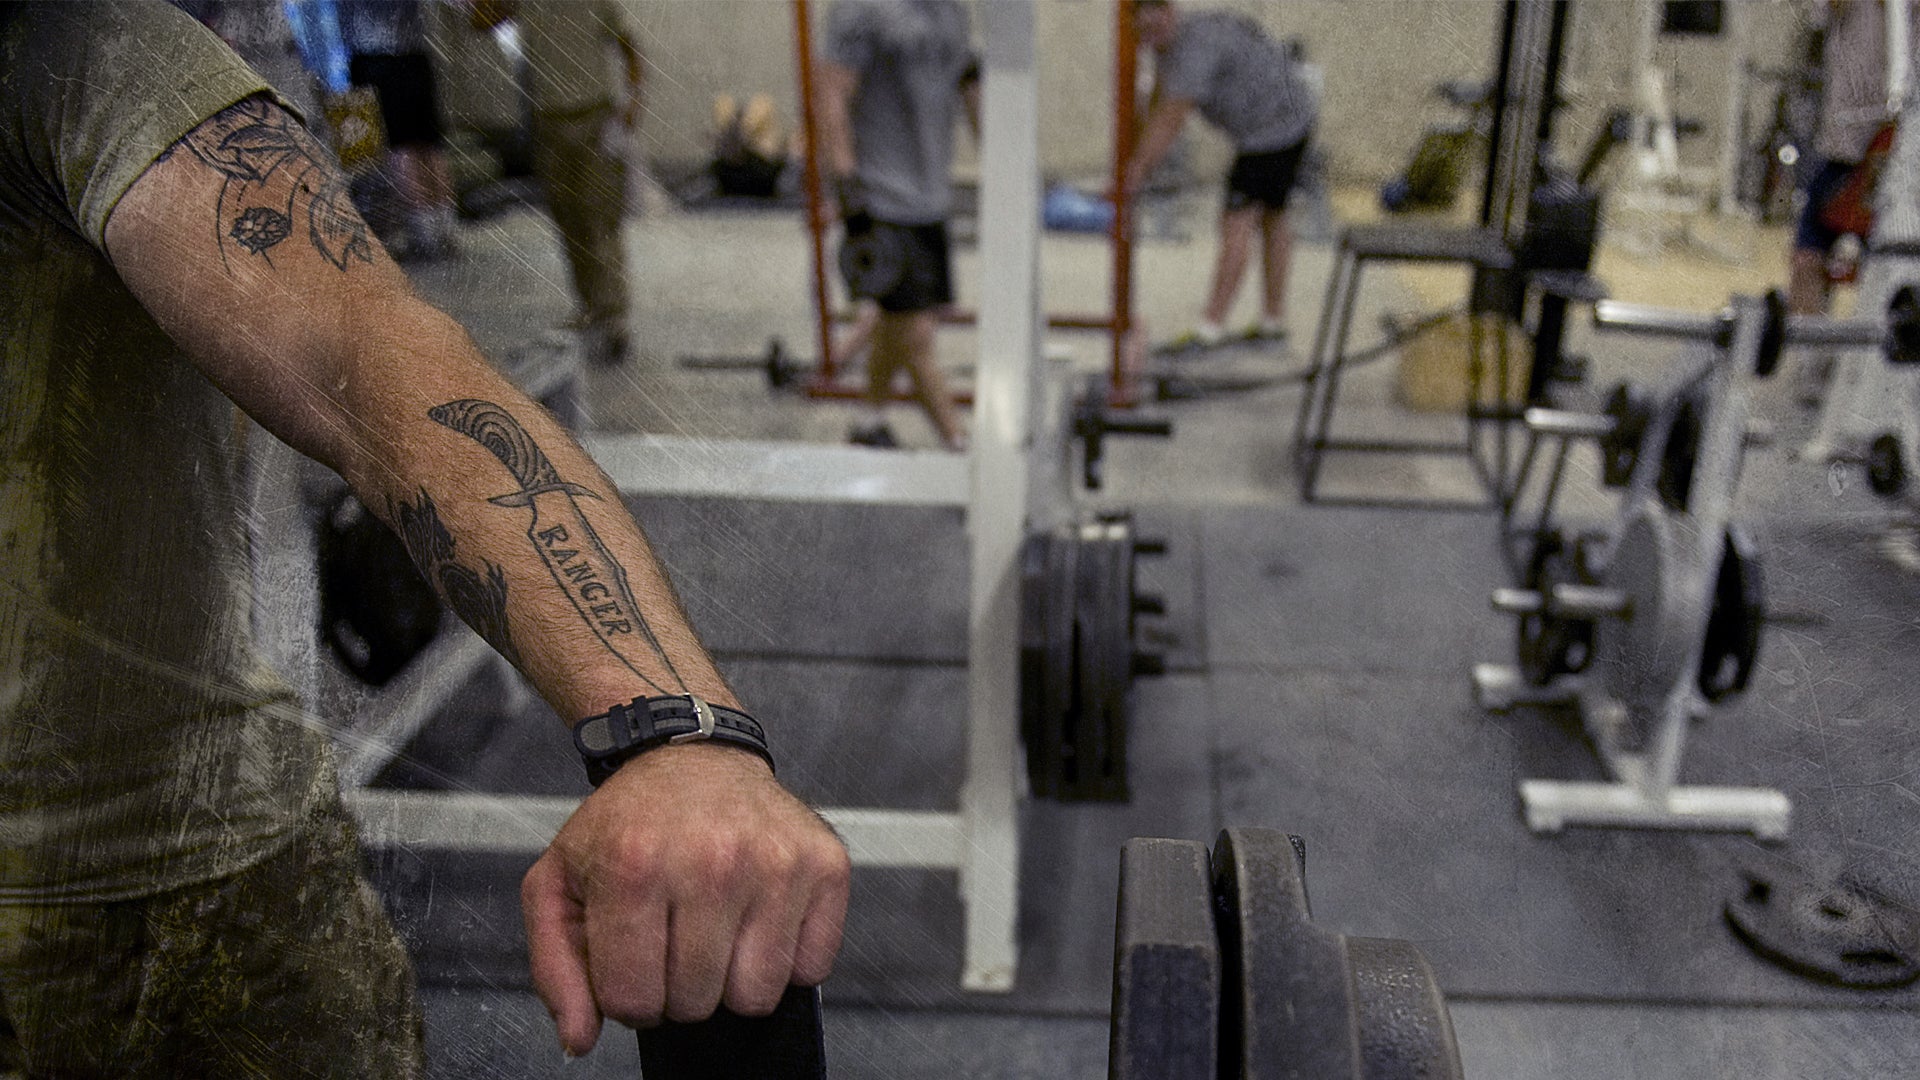 US Army goes to war over tattoos